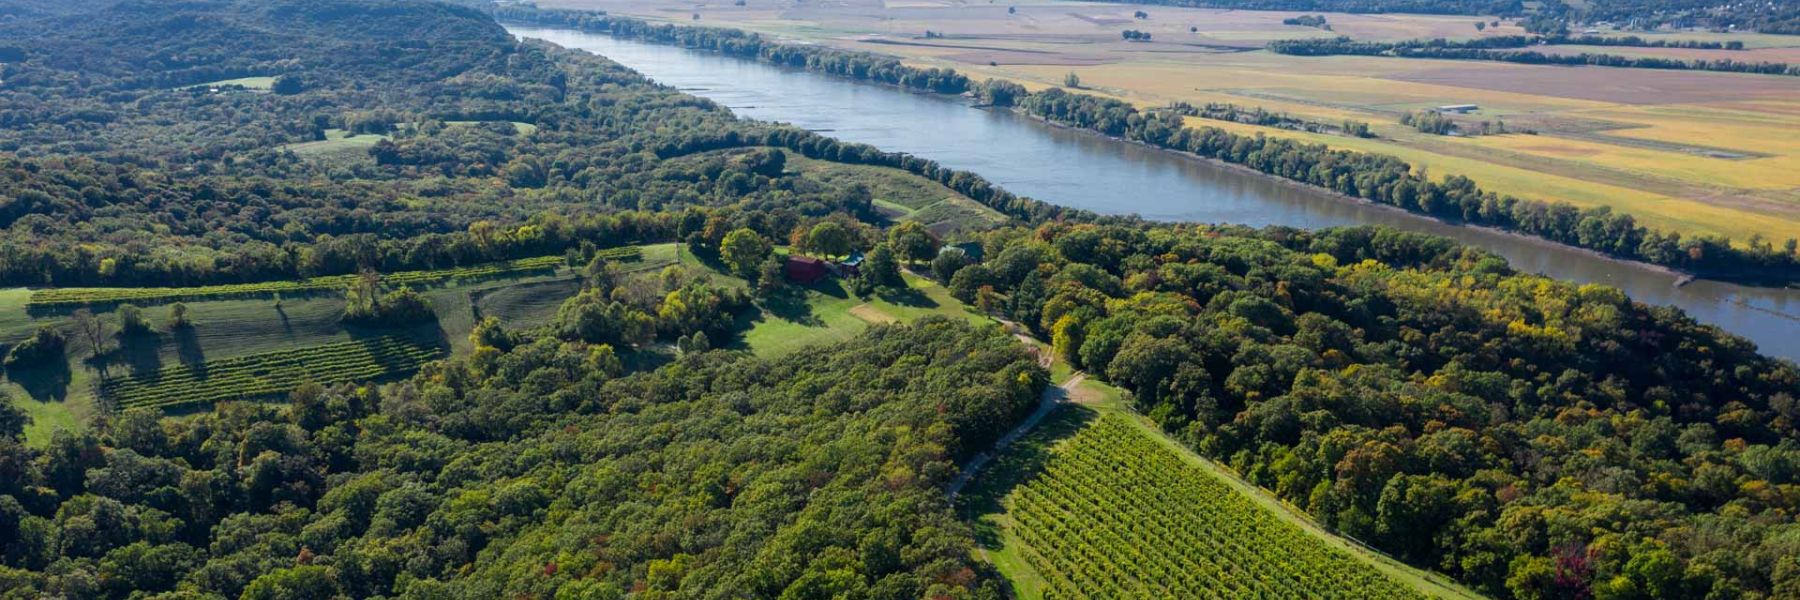 Missouri wine country is one of the best day trip options from St. Louis.